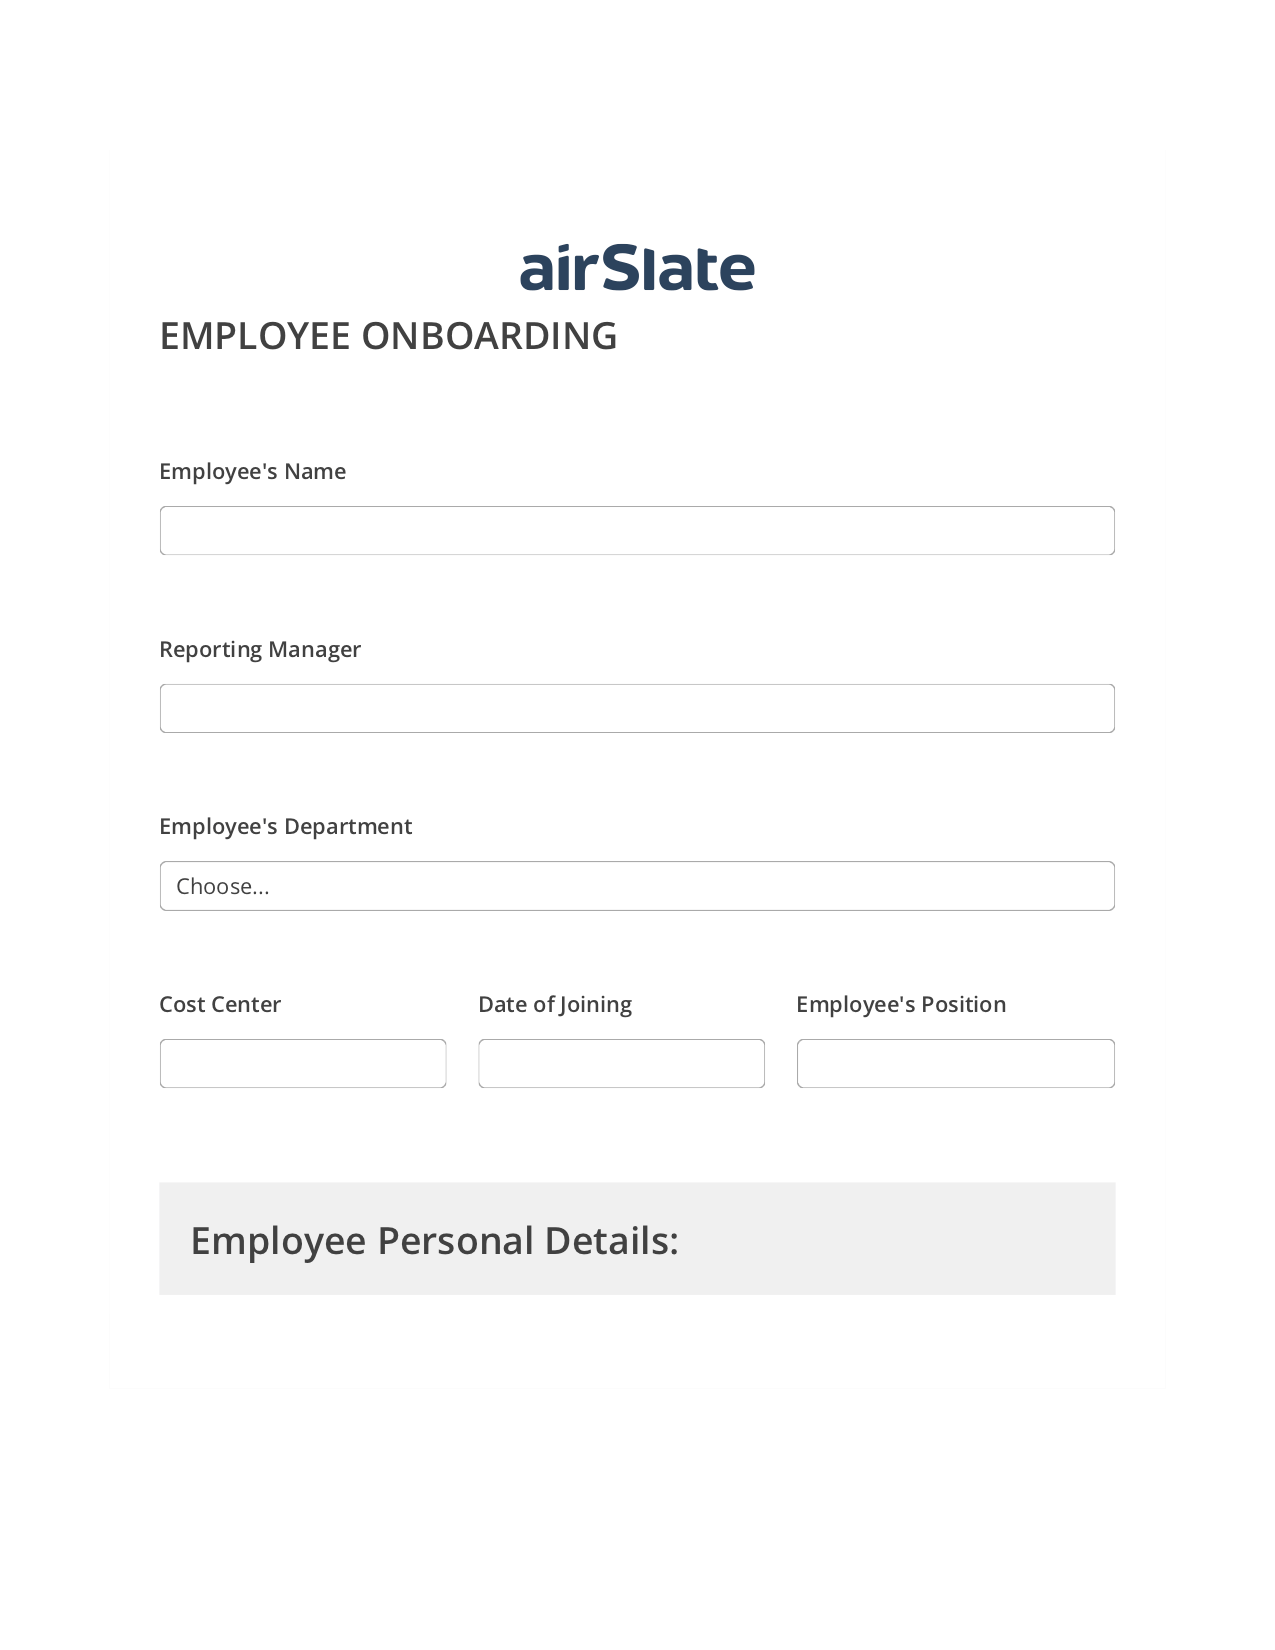 Employee Onboarding Workflow Pre-fill from another Slate Bot, Reminder Bot, Text Message Notification Postfinish Bot